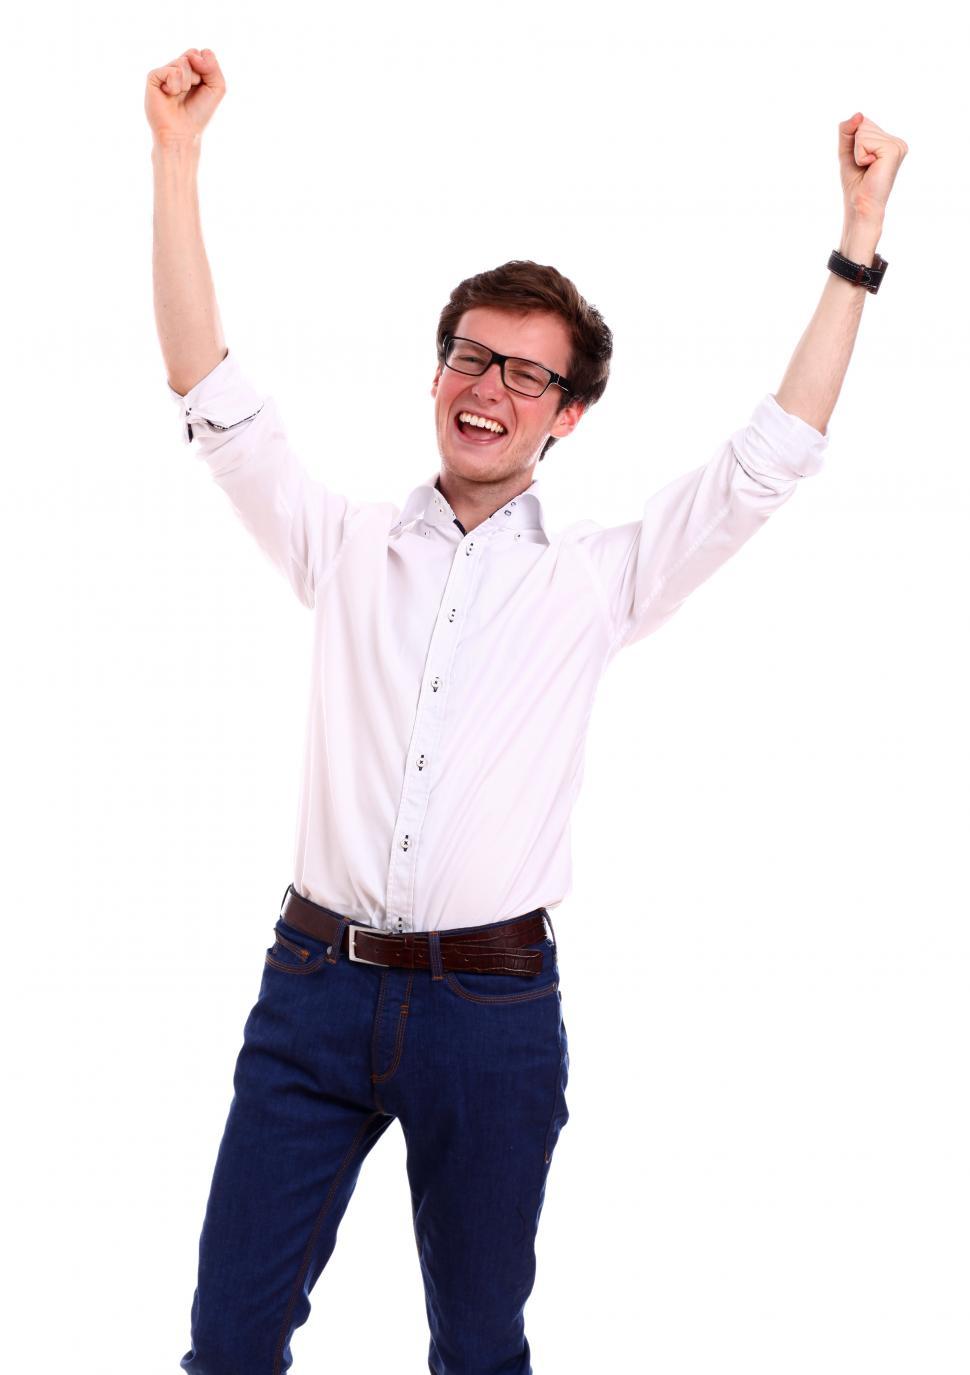 Free Image of Portrait of happy guy with arms raised in victory over white background 